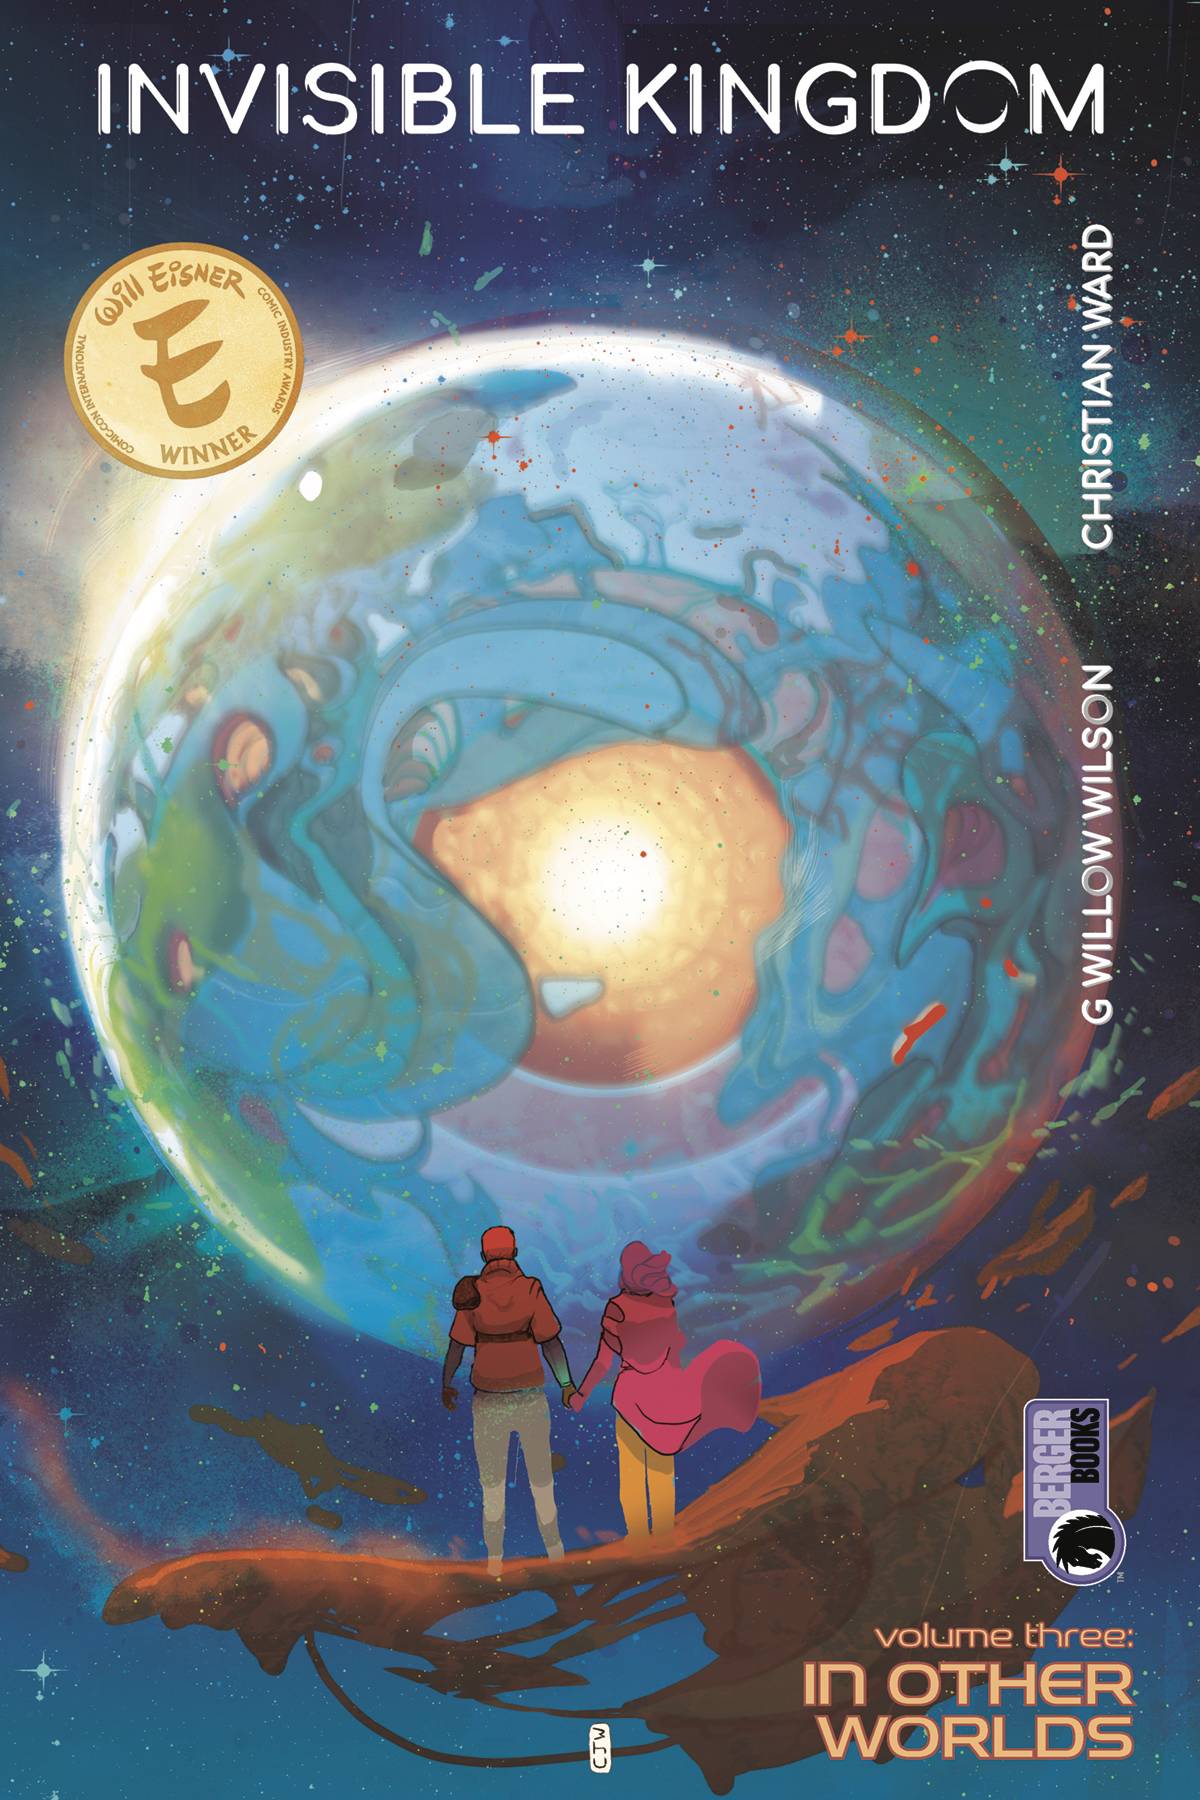 INVISIBLE KINGDOM TP VOL 03 IN OTHER WORLDS (JAN210266) (MR)